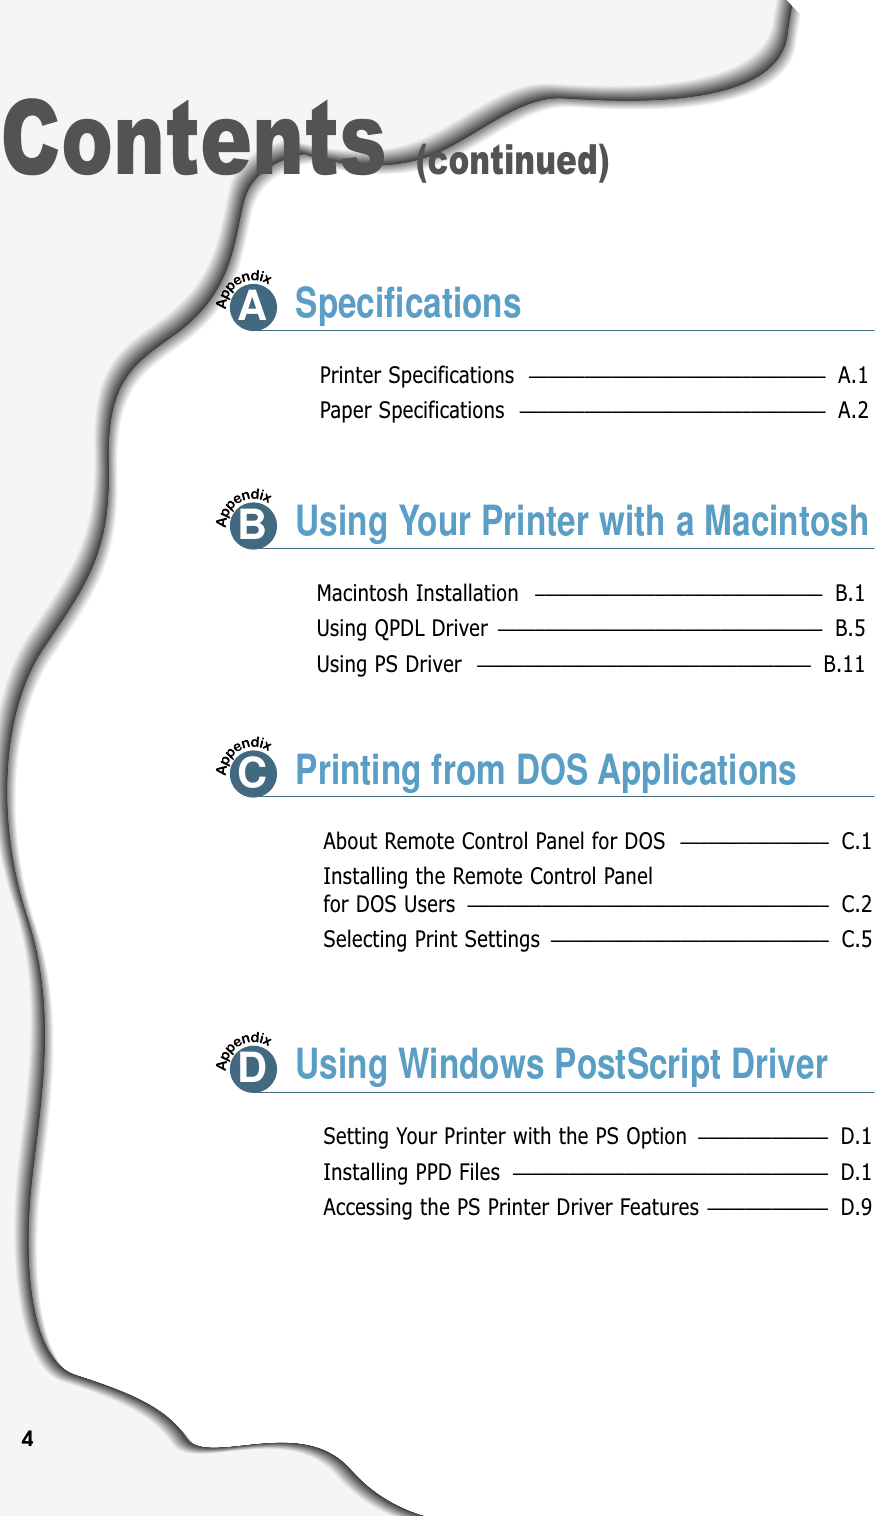 4Contents (continued)Printer Specifications –––––––––––––––––––––––––––––––– A.1Paper Specifications ––––––––––––––––––––––––––––––––– A.2ASpecificationsMacintosh Installation ––––––––––––––––––––––––––––––– B.1Using QPDL Driver ––––––––––––––––––––––––––––––––––– B.5Using PS Driver –––––––––––––––––––––––––––––––––––– B.11About Remote Control Panel for DOS  –––––––––––––––– C.1Installing the Remote Control Panel for DOS Users ––––––––––––––––––––––––––––––––––––––– C.2Selecting Print Settings –––––––––––––––––––––––––––––– C.5BUsing Your Printer with a MacintoshCPrinting from DOS ApplicationsSetting Your Printer with the PS Option –––––––––––––– D.1Installing PPD Files  –––––––––––––––––––––––––––––––––– D.1Accessing the PS Printer Driver Features ––––––––––––– D.9DUsing Windows PostScript Driver